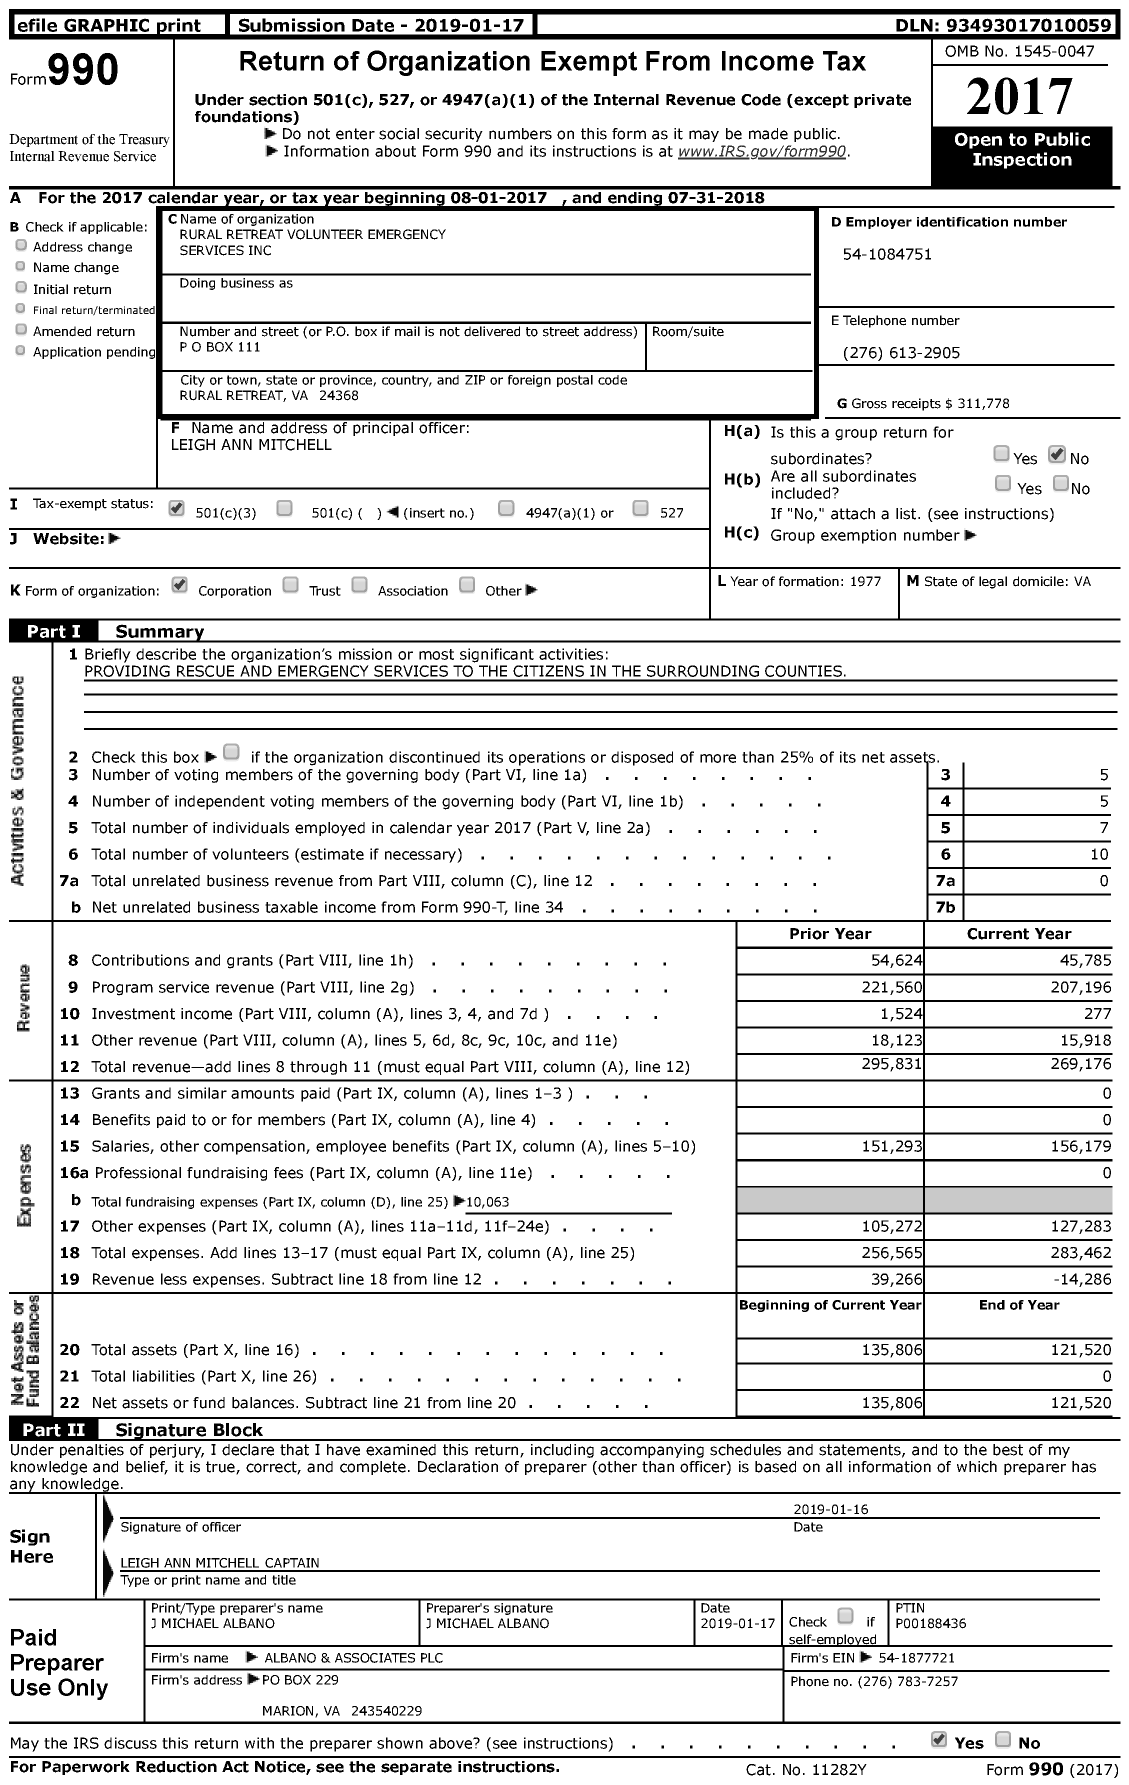 Image of first page of 2017 Form 990 for Rural Retreat Volunteer Emergency Services